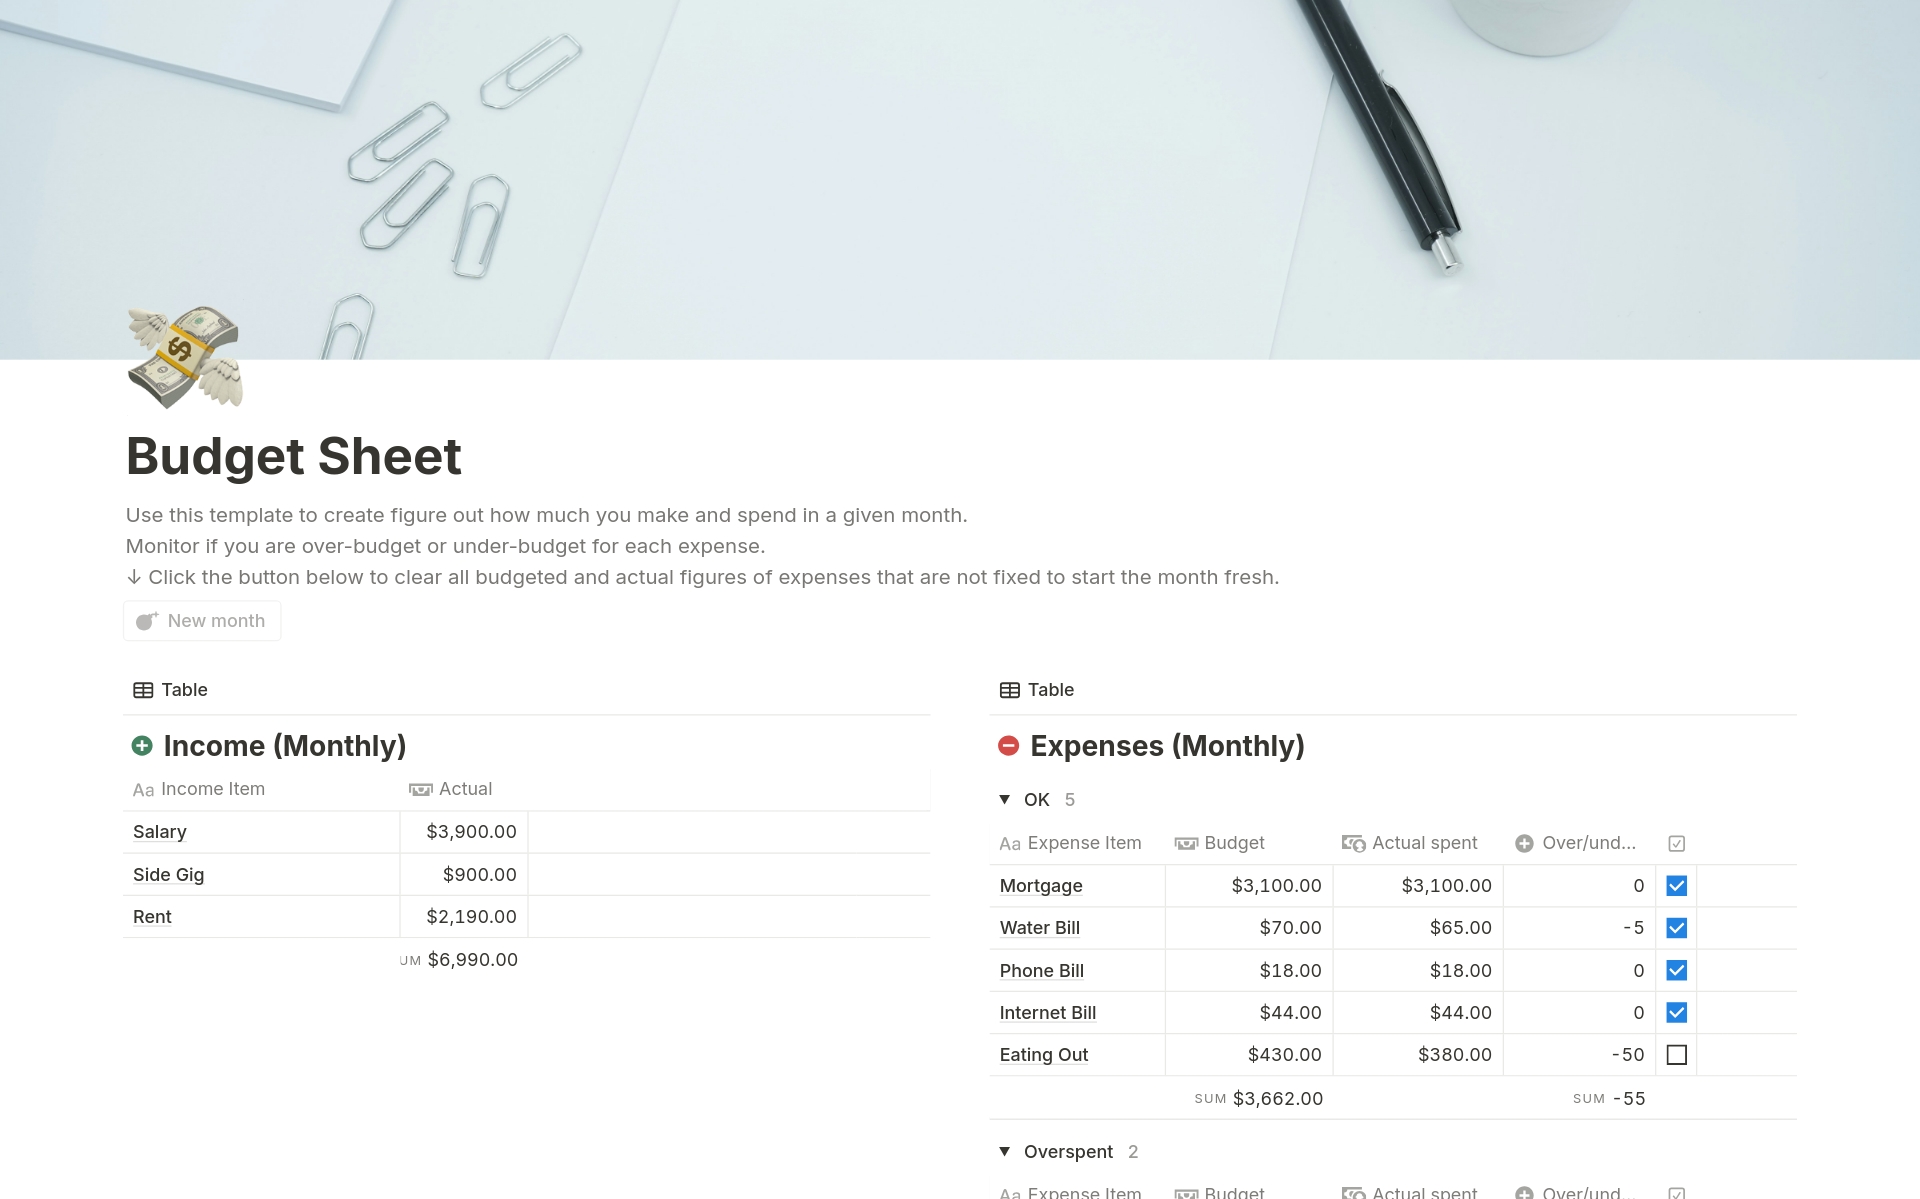 Track your spending against set targets to instantly see where you’re over or under your planned budget.